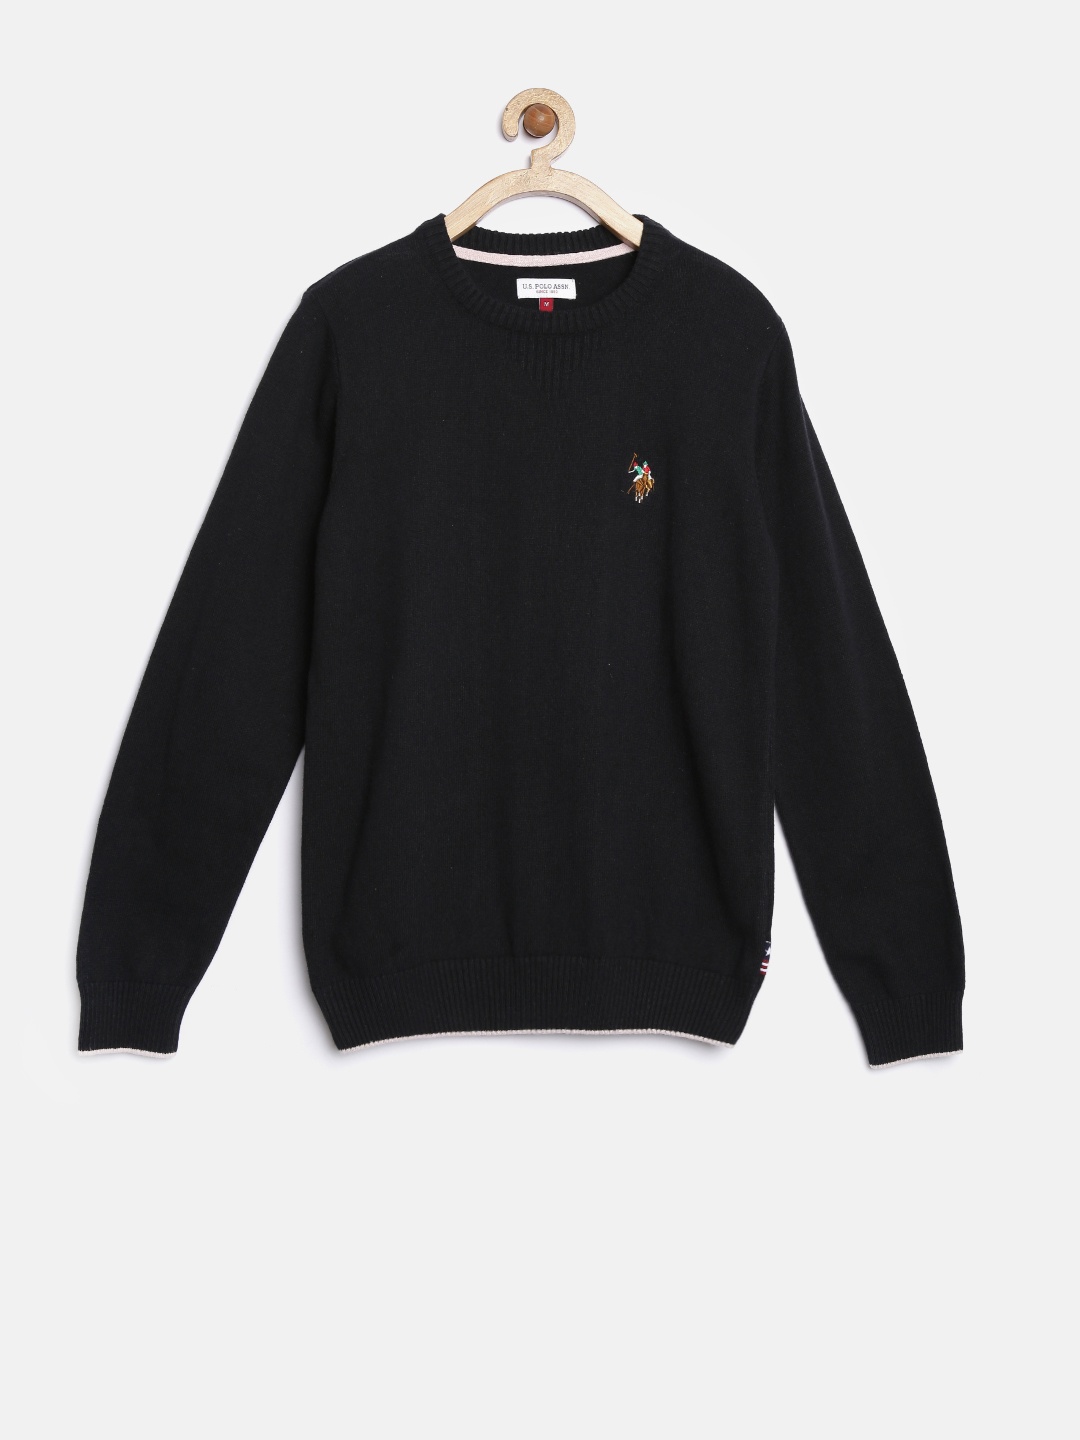 U.S. Polo Assn. Kids Boys Black Sweater price Myntra. Sweaters Deals at ...